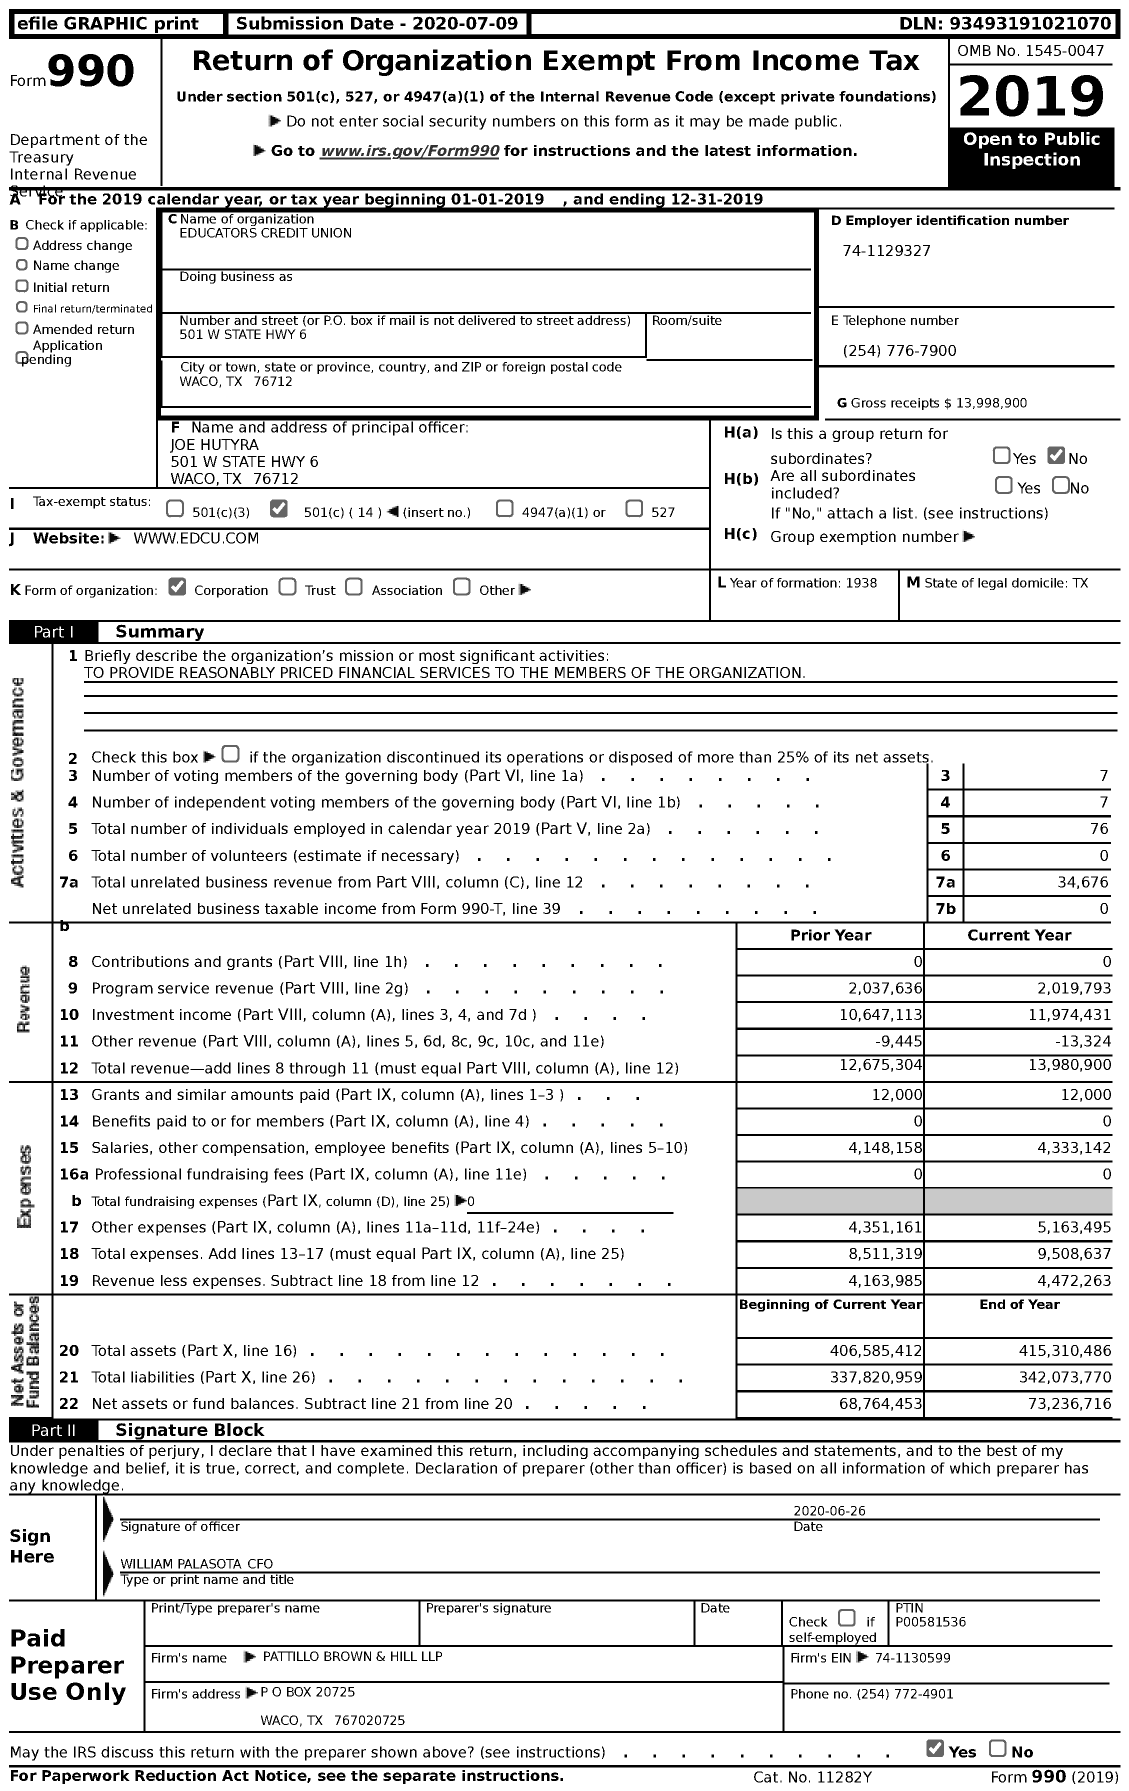 Image of first page of 2019 Form 990 for Educators Credit Union (ECU)